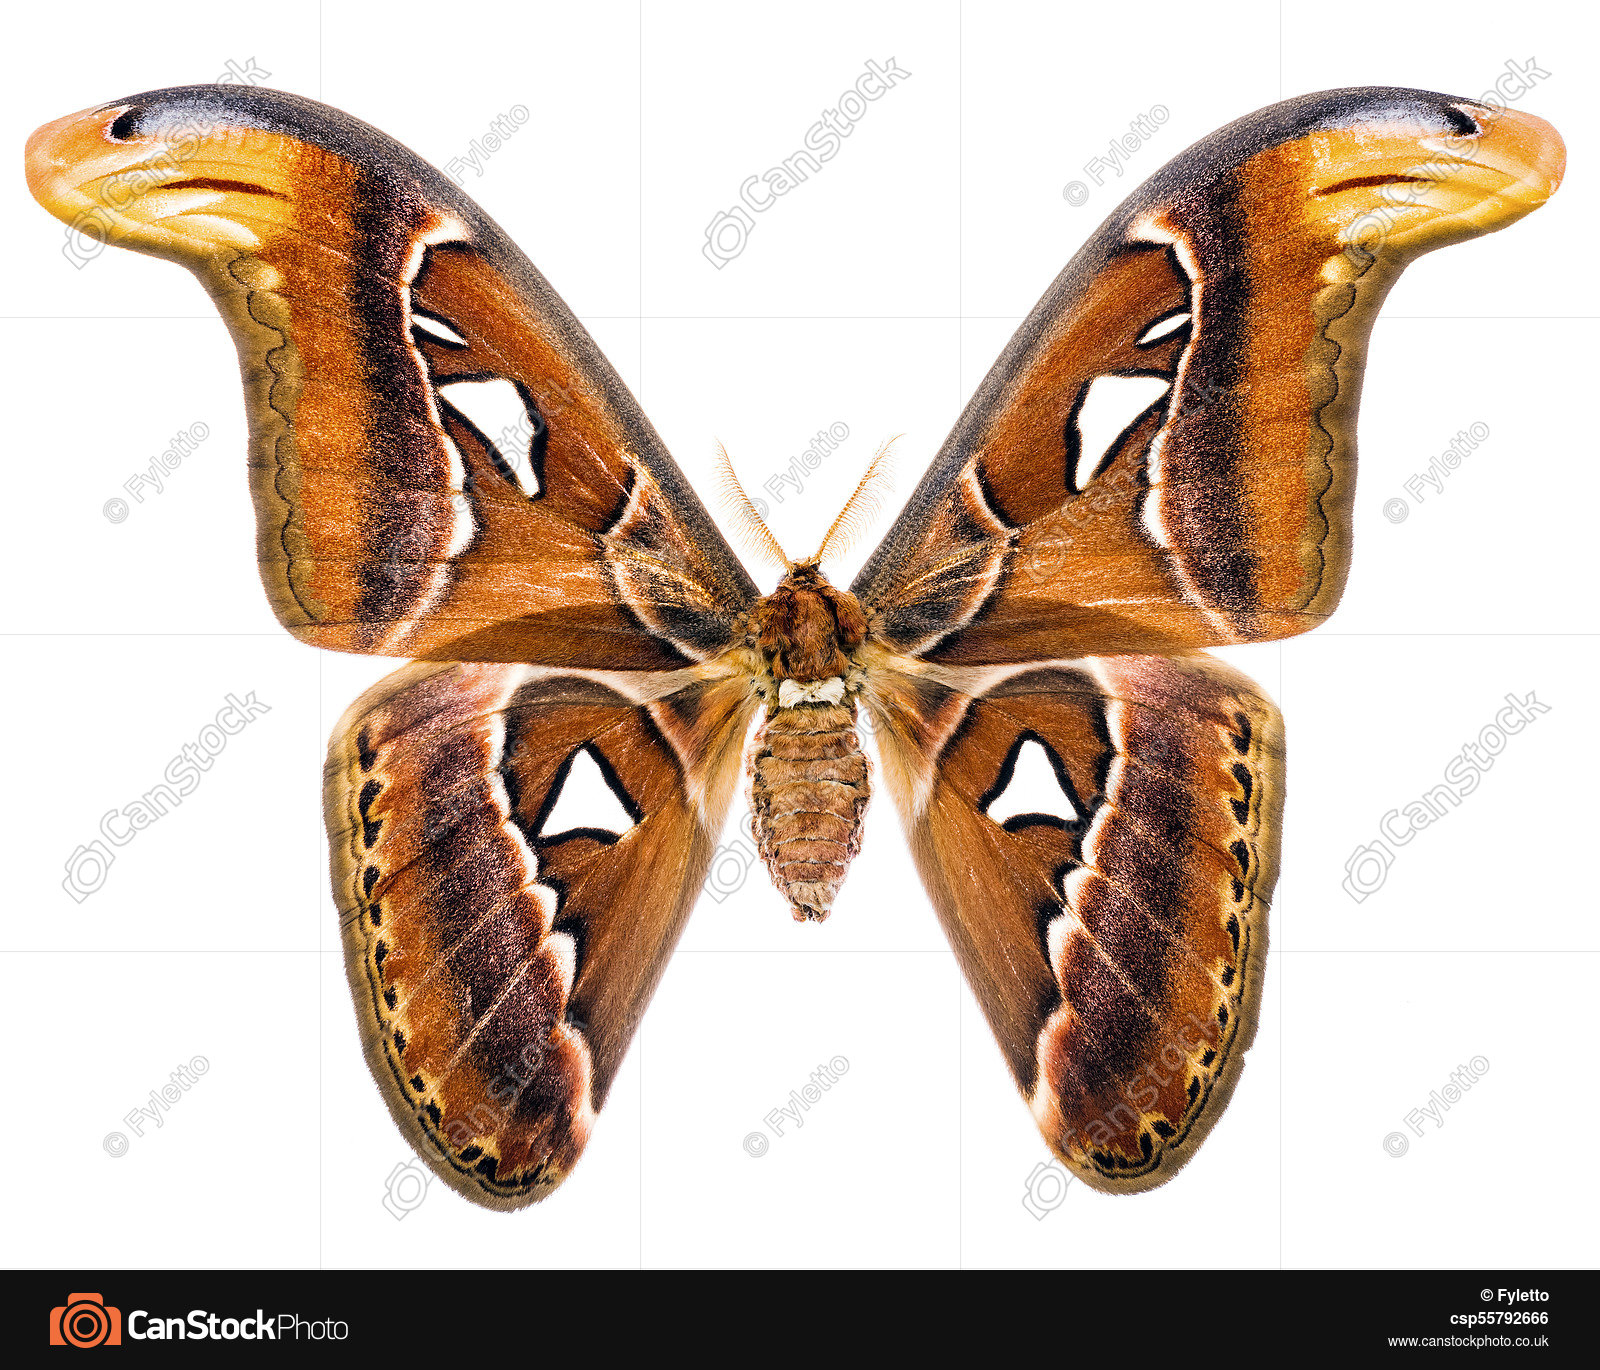 Attacus atlas giant moth of indonesia. Attacus atlas is a... stock ...